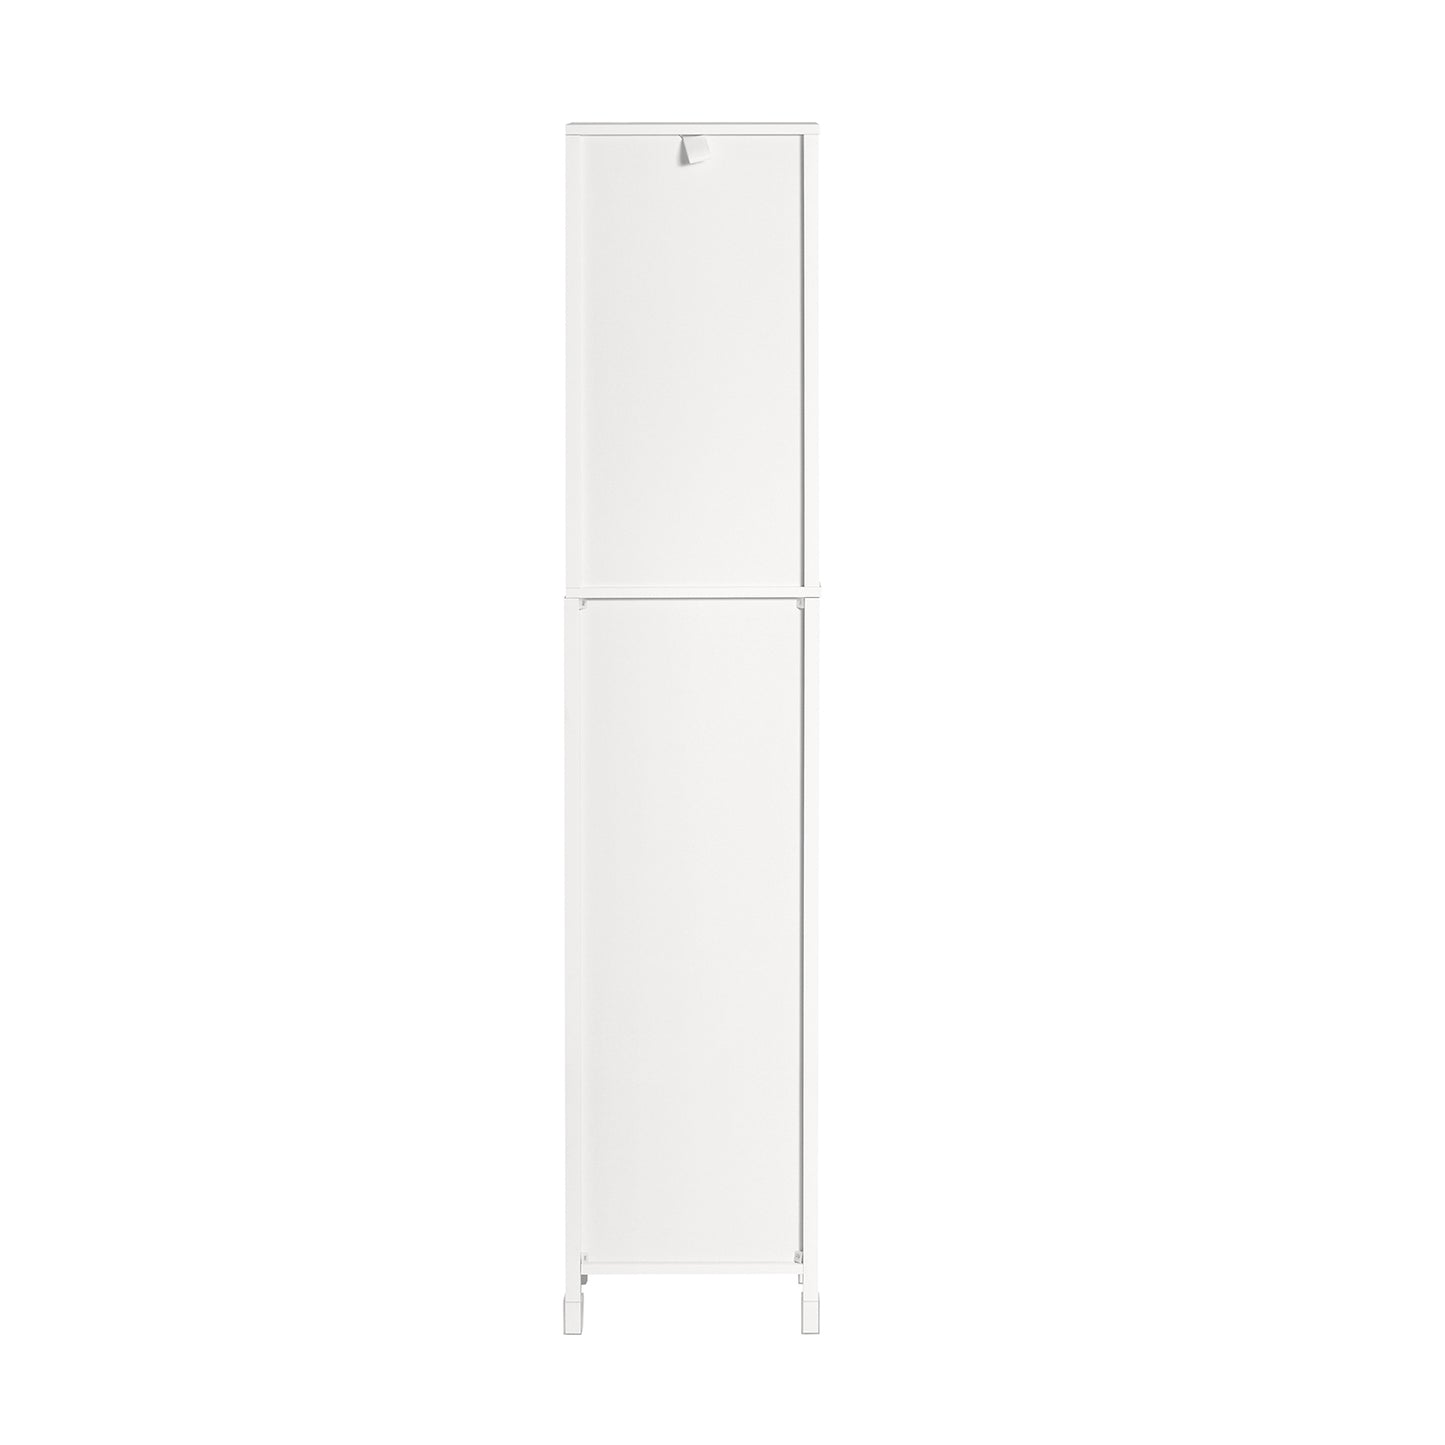 SoBuy Freestanding Tall Cabinet, Tall Cupboard, Standing Shelves with Drawers